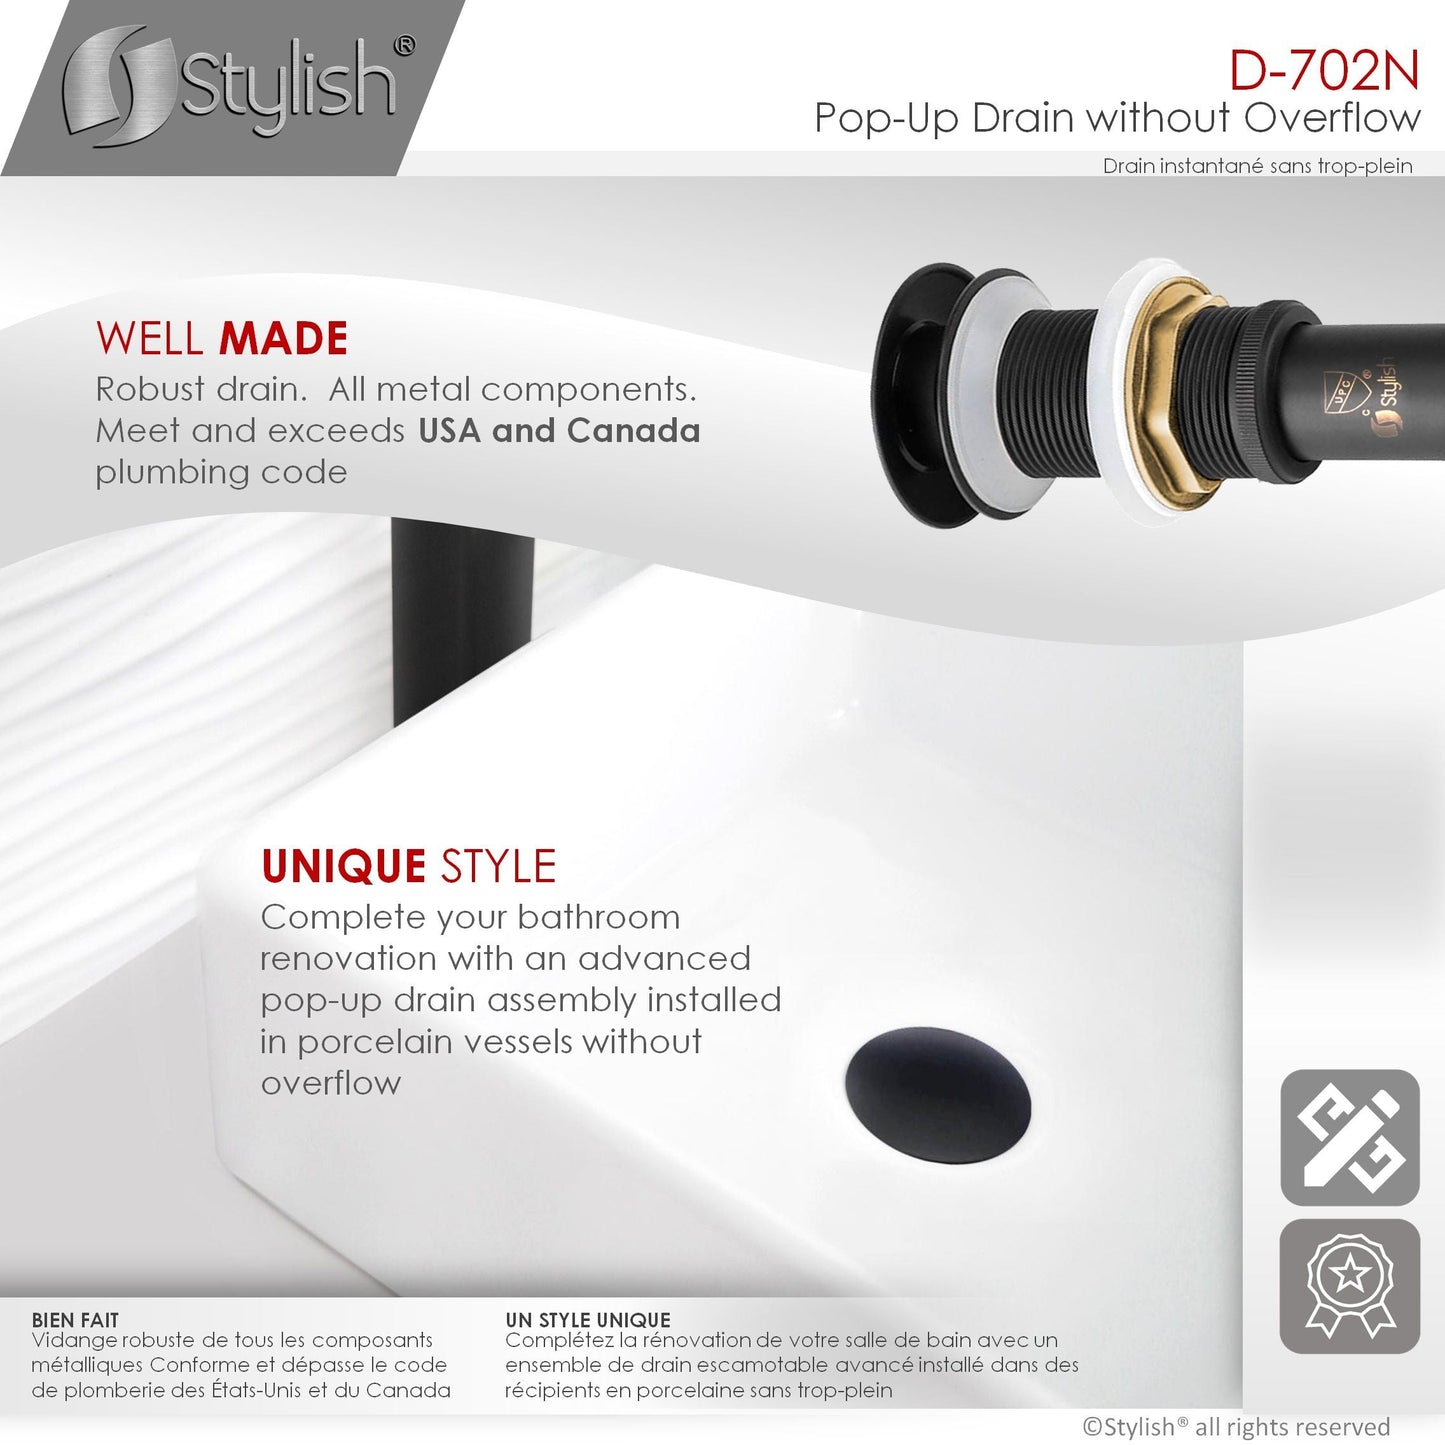 Stylish Pop-Up Drain with Overflow D-702N